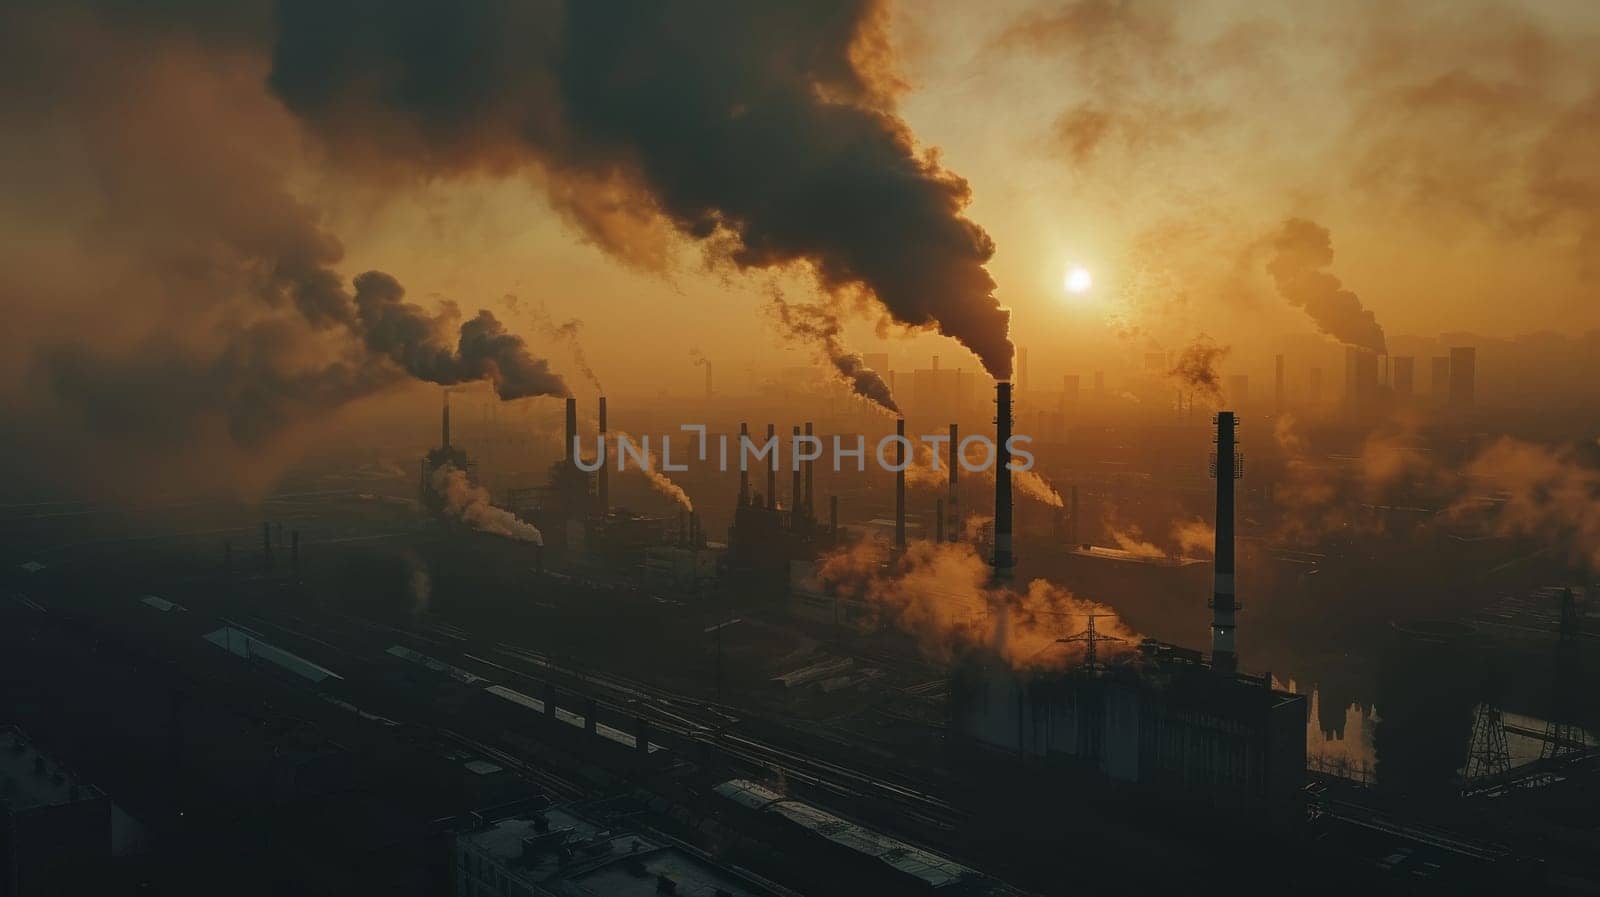 A city skyline with smoke billowing from the factories. Scene is bleak and polluted